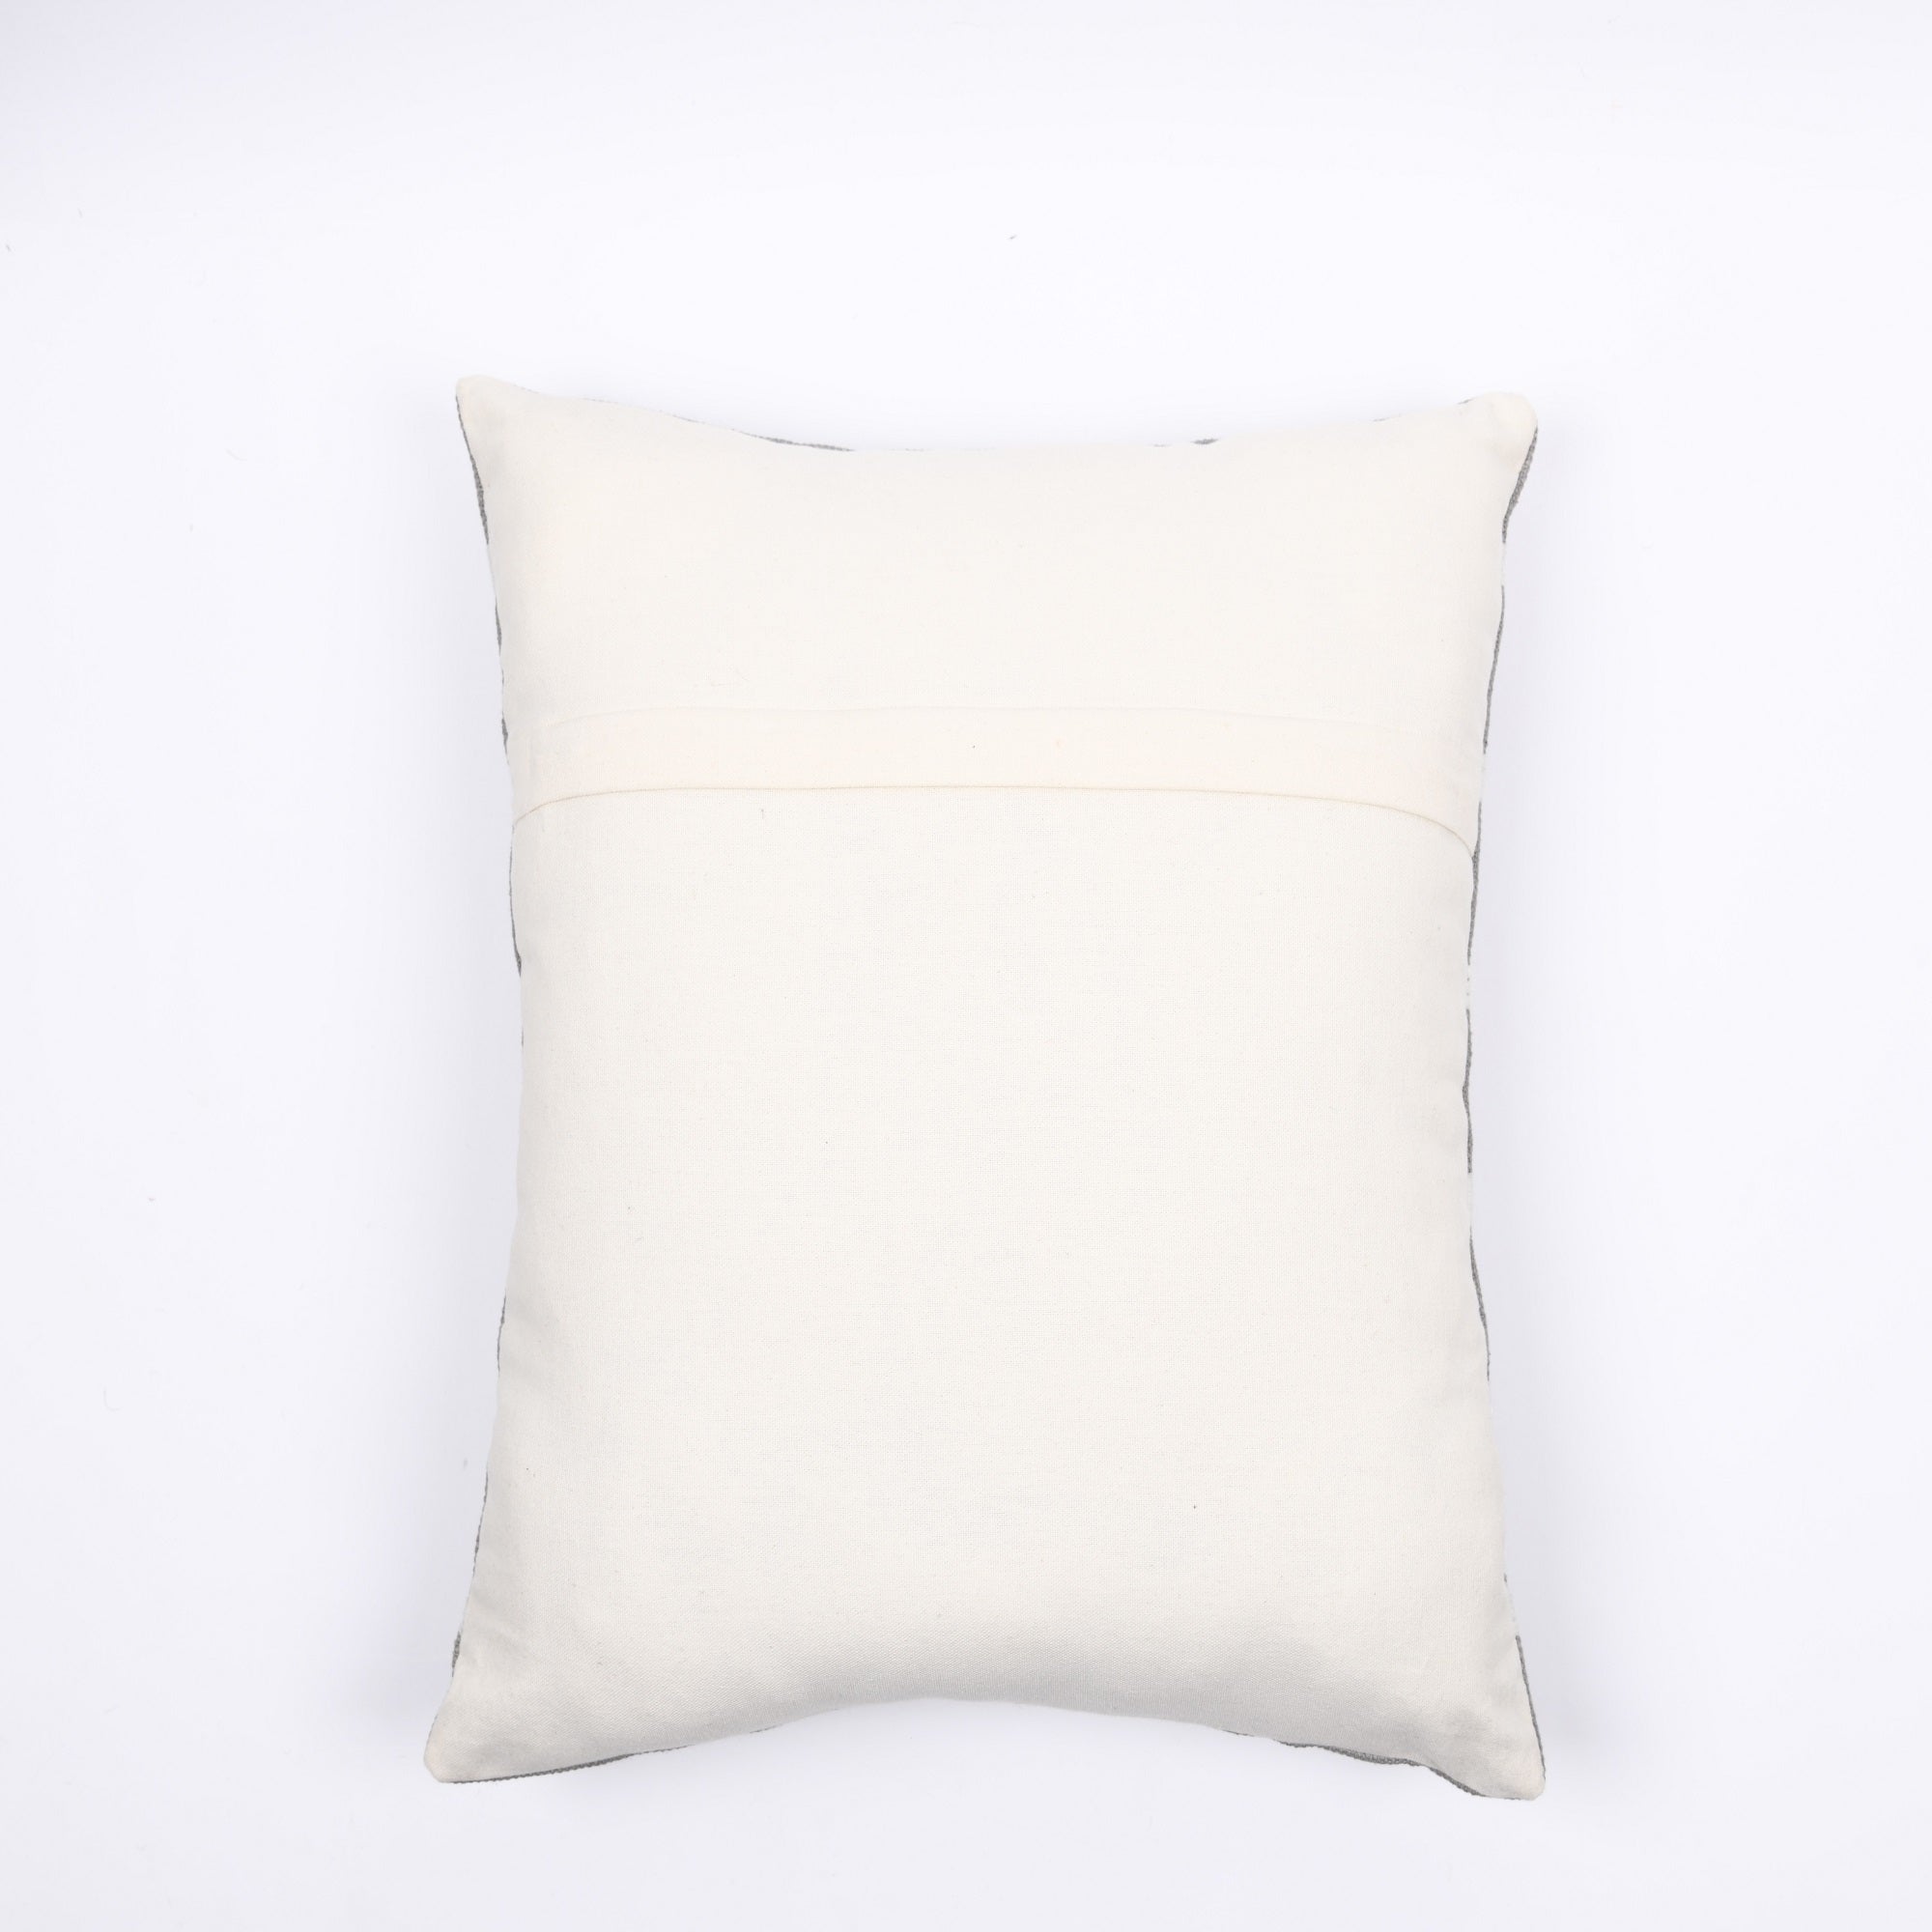 'Country Oasis' Hand-Woven Cotton Wool Cushion Cover